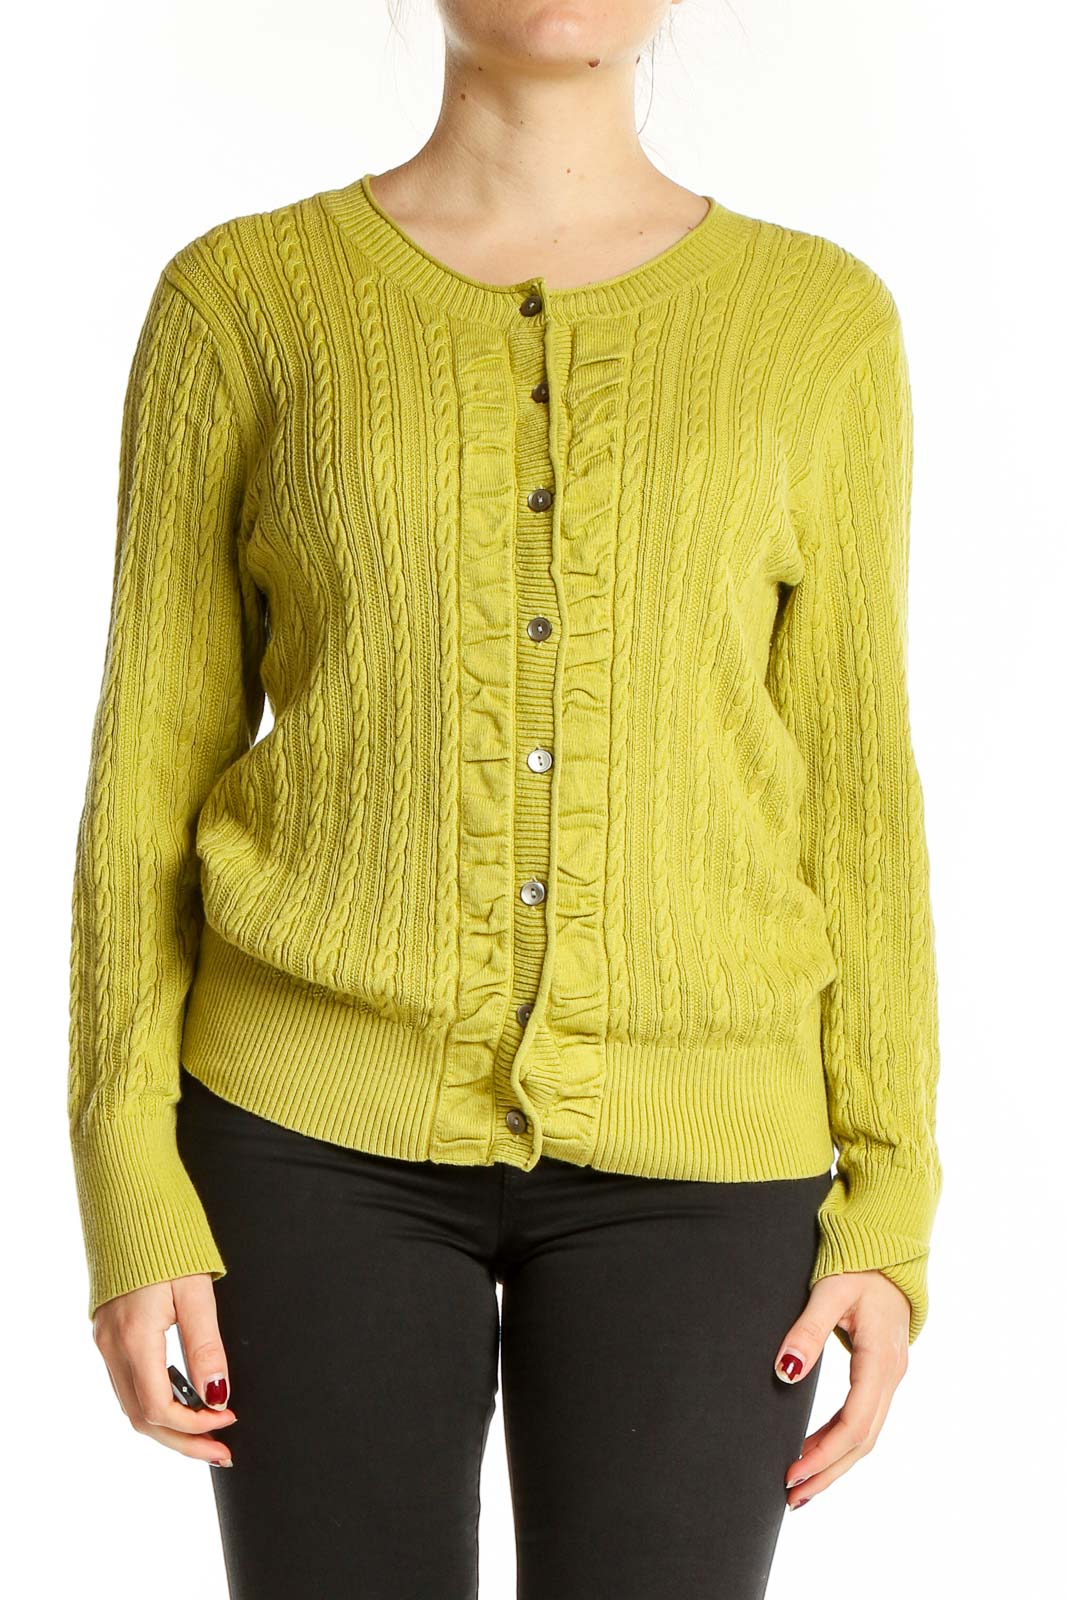 Green Chartreuse Cardigan Front